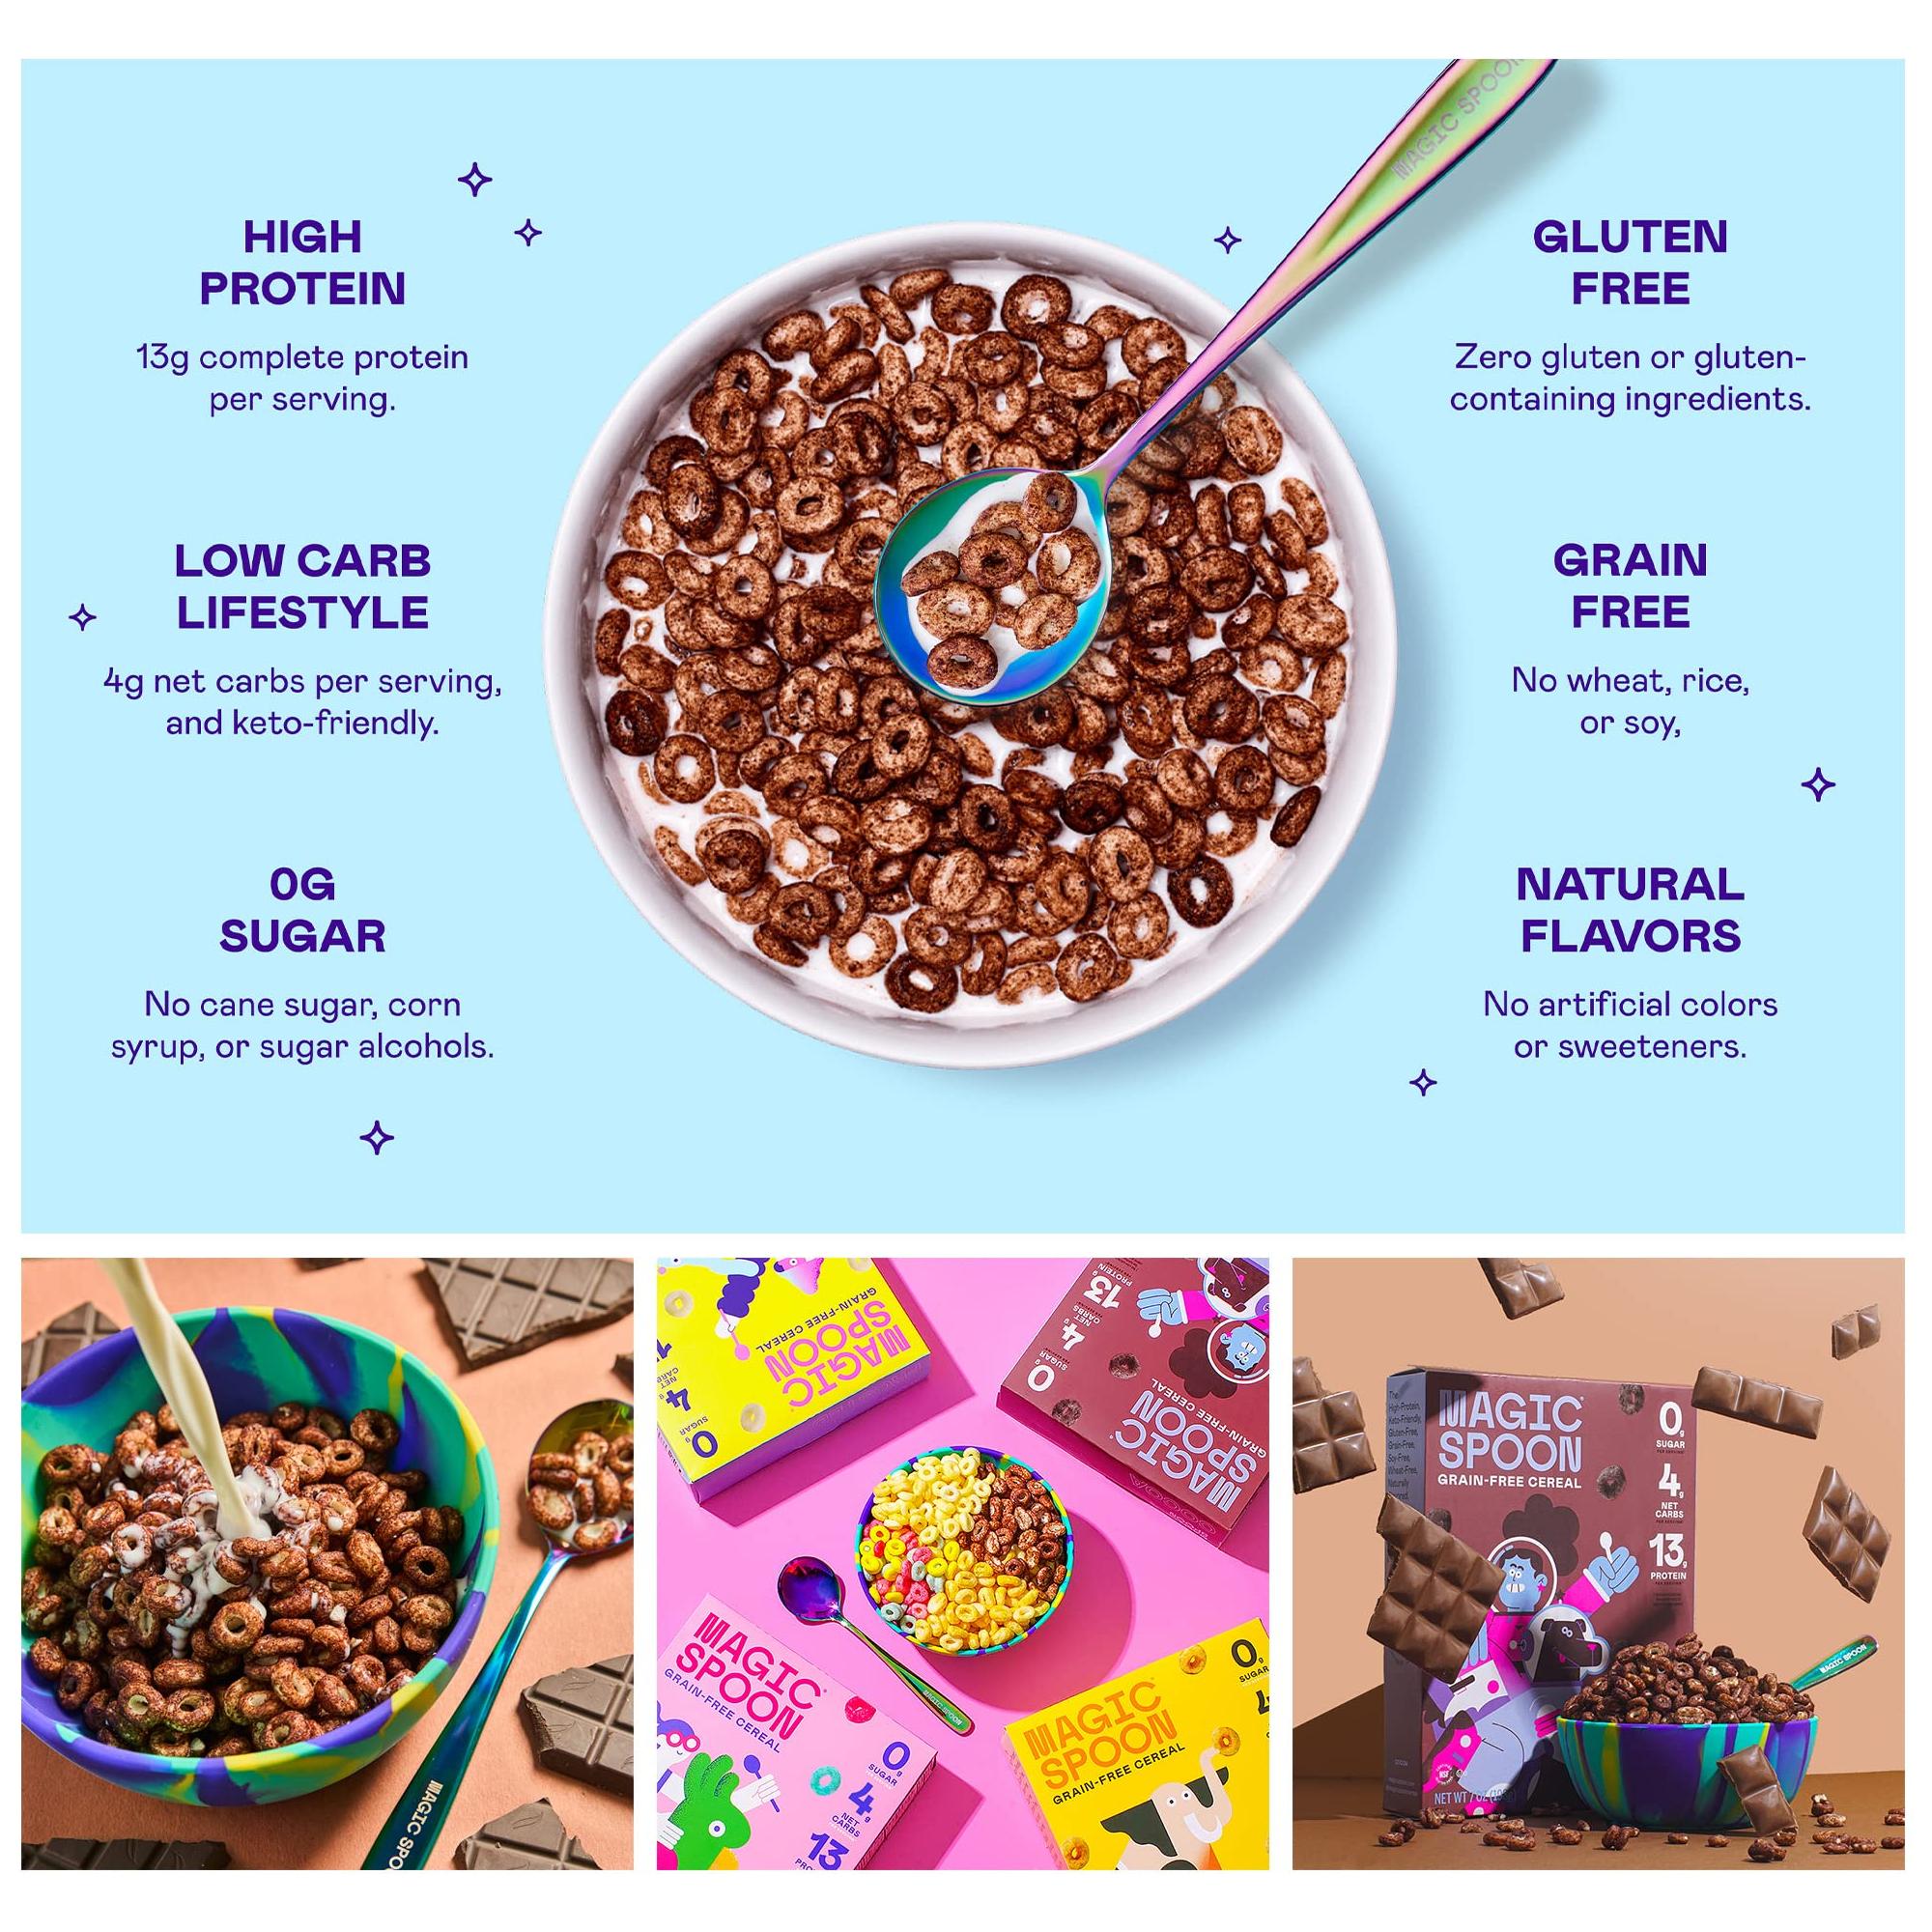 Magic Spoon Cereal, Cocoa 4-Pack of Cereal - Keto &amp; Low Carb Lifestyles I Gluten &amp; Grain Free I High Protein I 0g Sugar